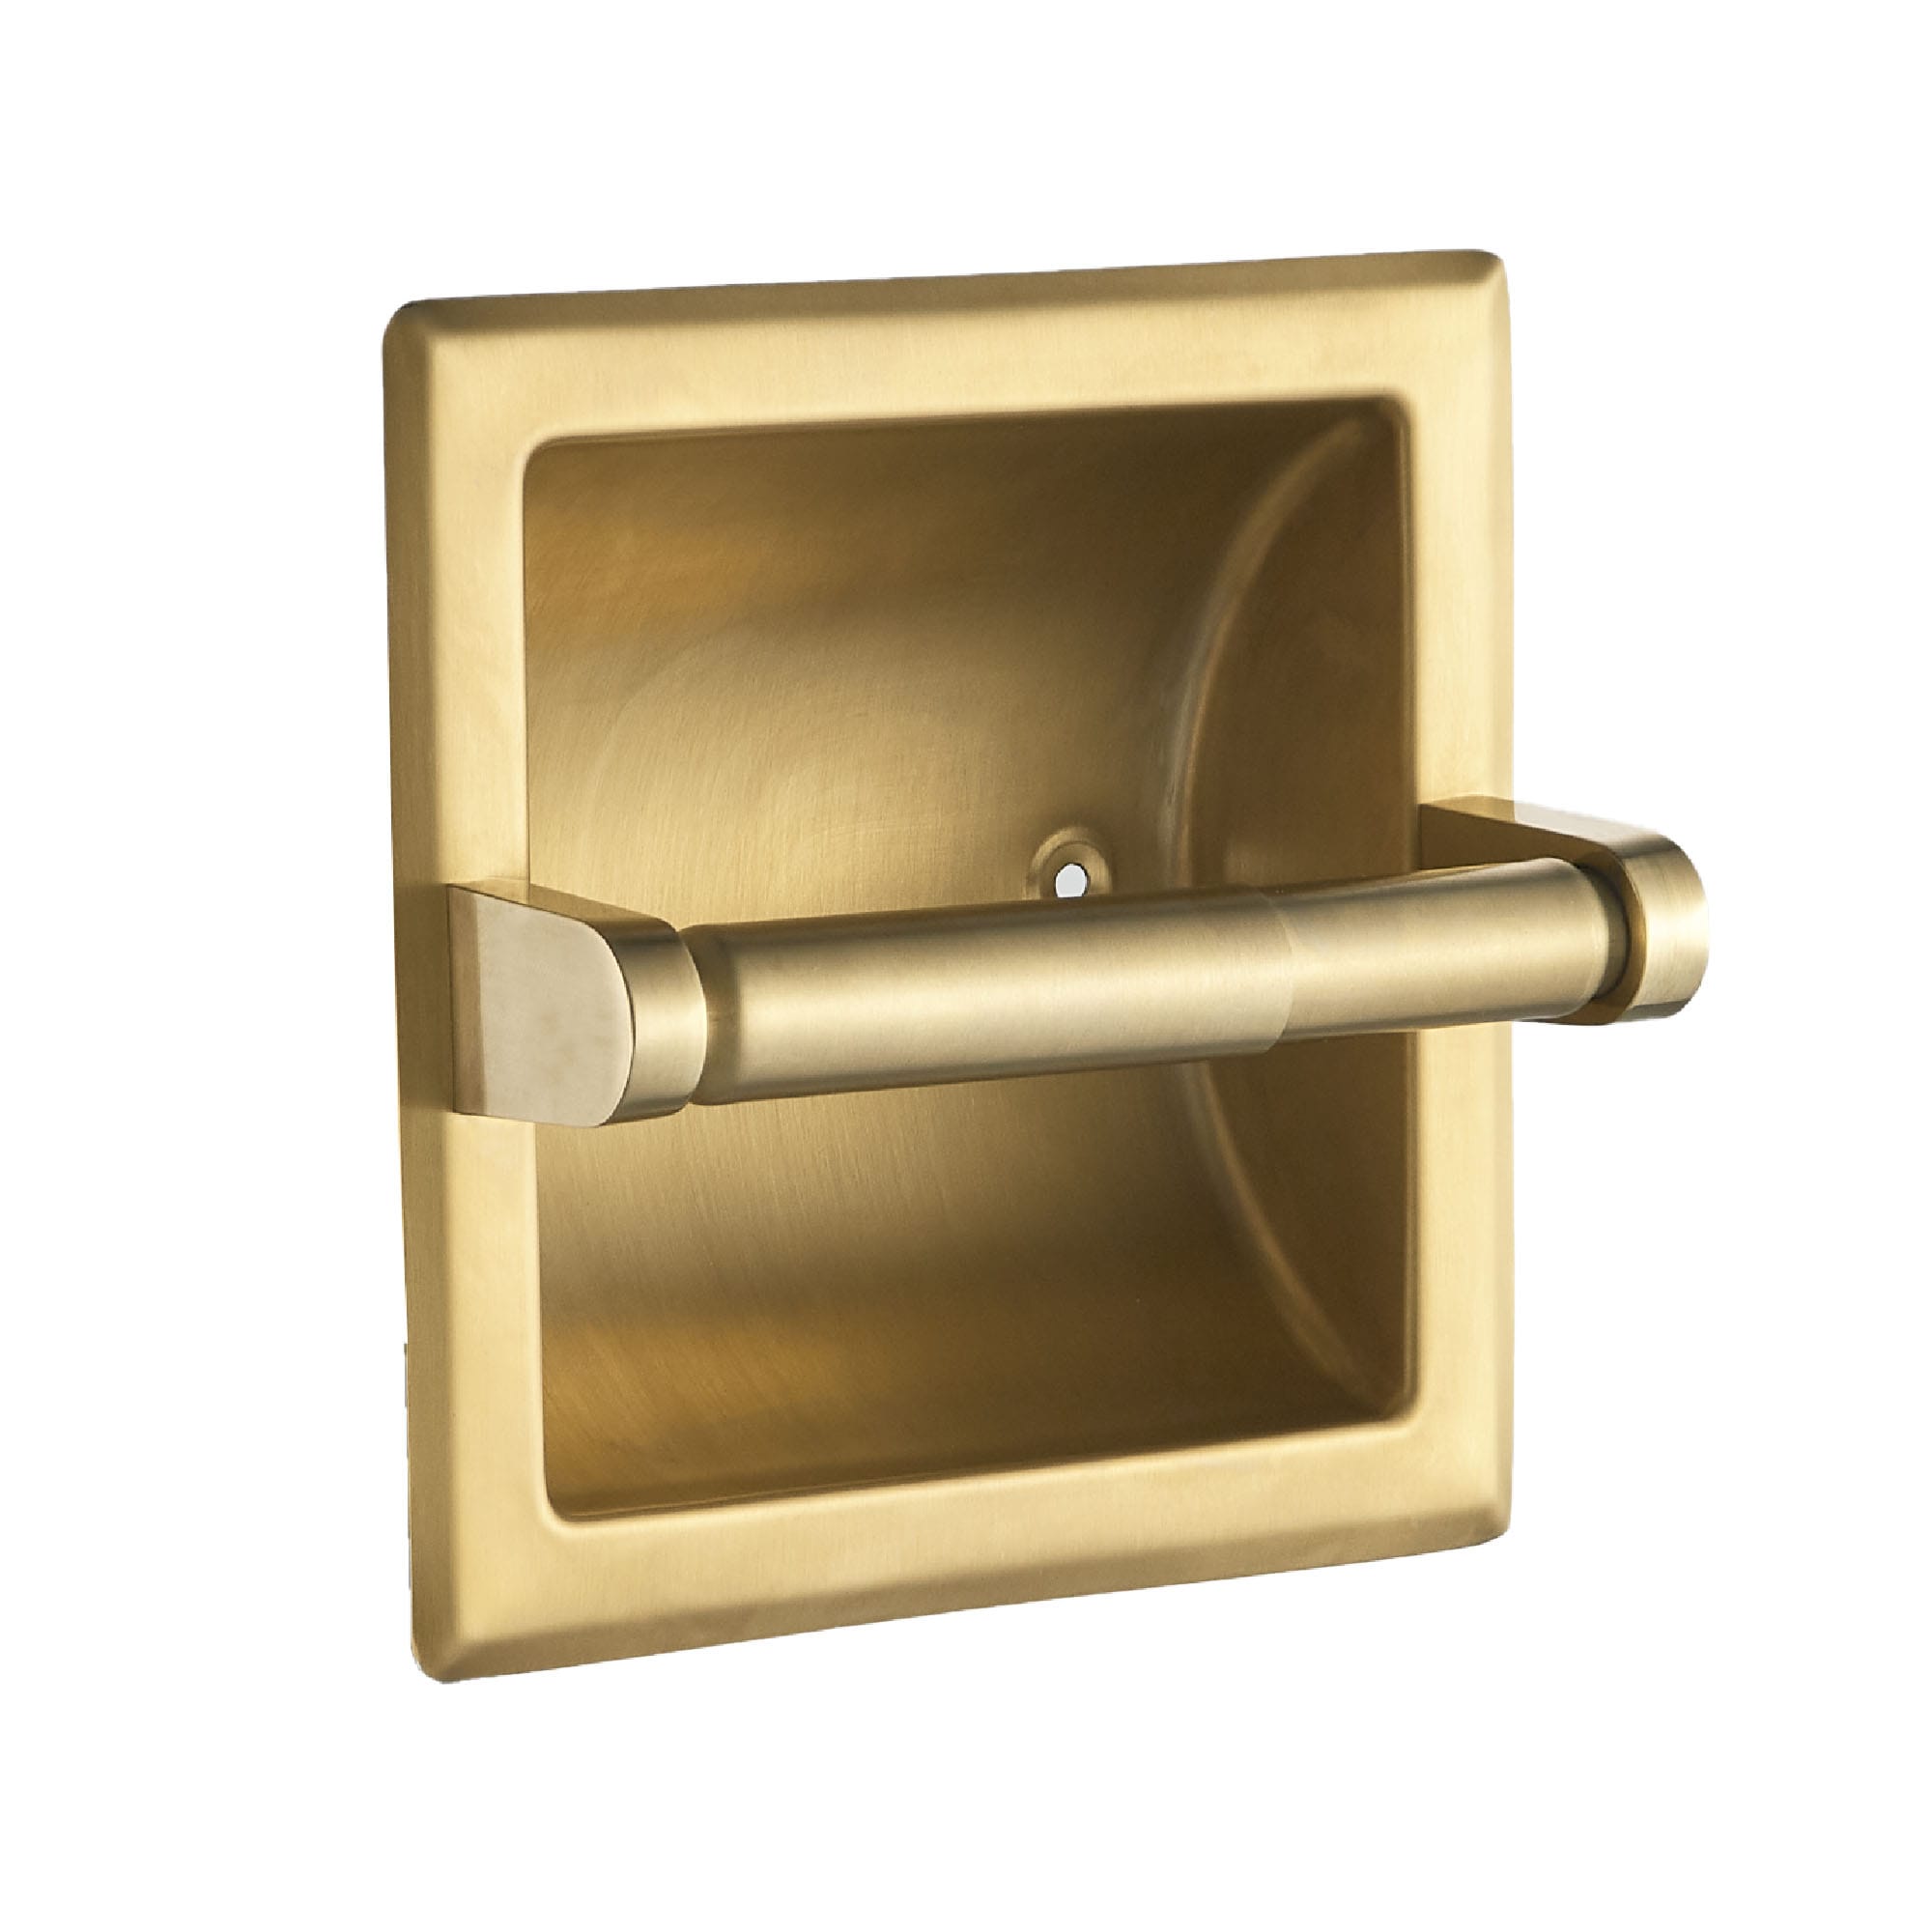 FORIOUS Wall Mount Post Toilet Paper Holder in Gold HH12401G - The